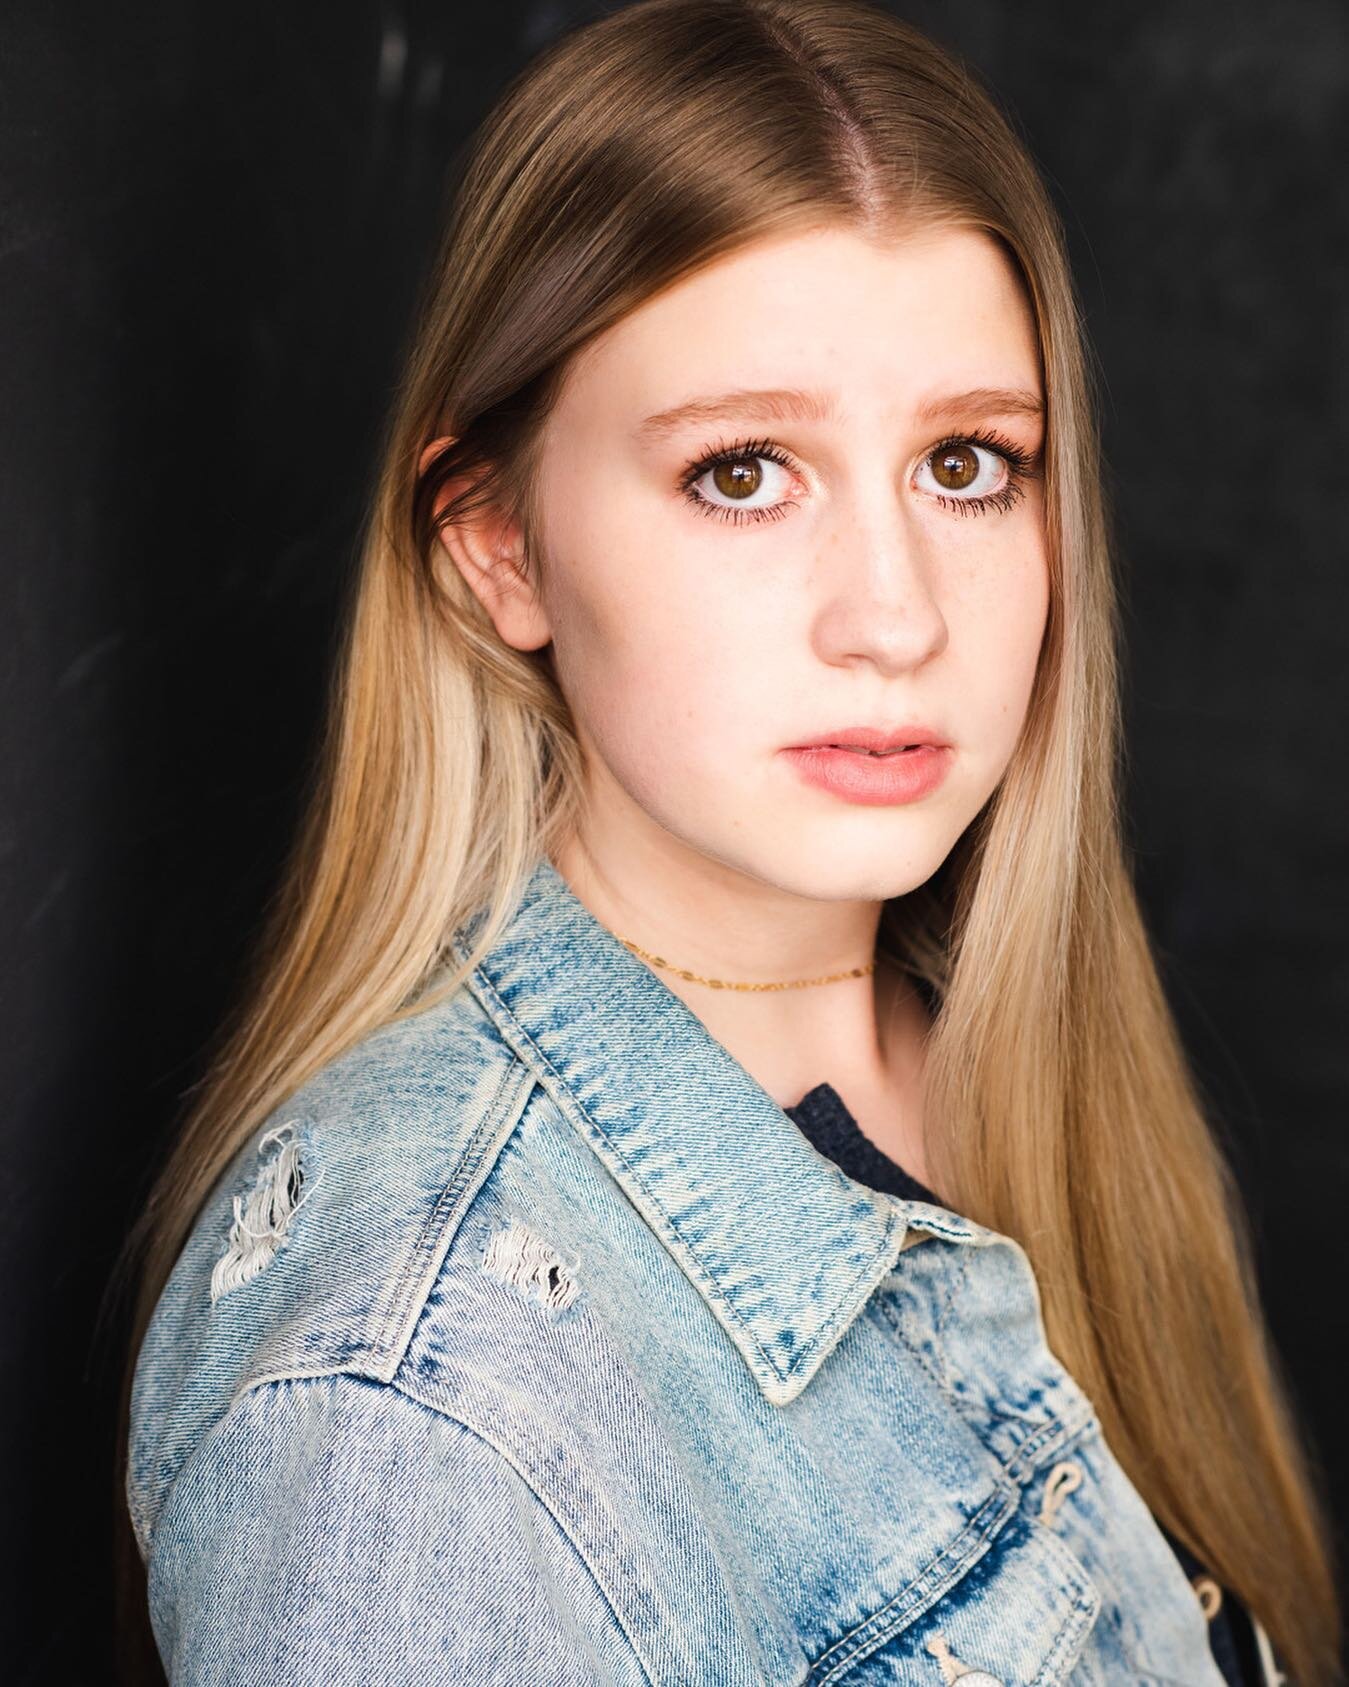 What&rsquo;s everyone doing for spring break this year?? Tell me below! 
⠀⠀⠀⠀⠀⠀⠀⠀⠀
 #utahphotographer #utahheadshotphotographer #pepperfoxphoto #pepperfoxheadshot #utahheadshots #utahtalent #utahactress #utahactor #actor #actress #theatre #actorresou